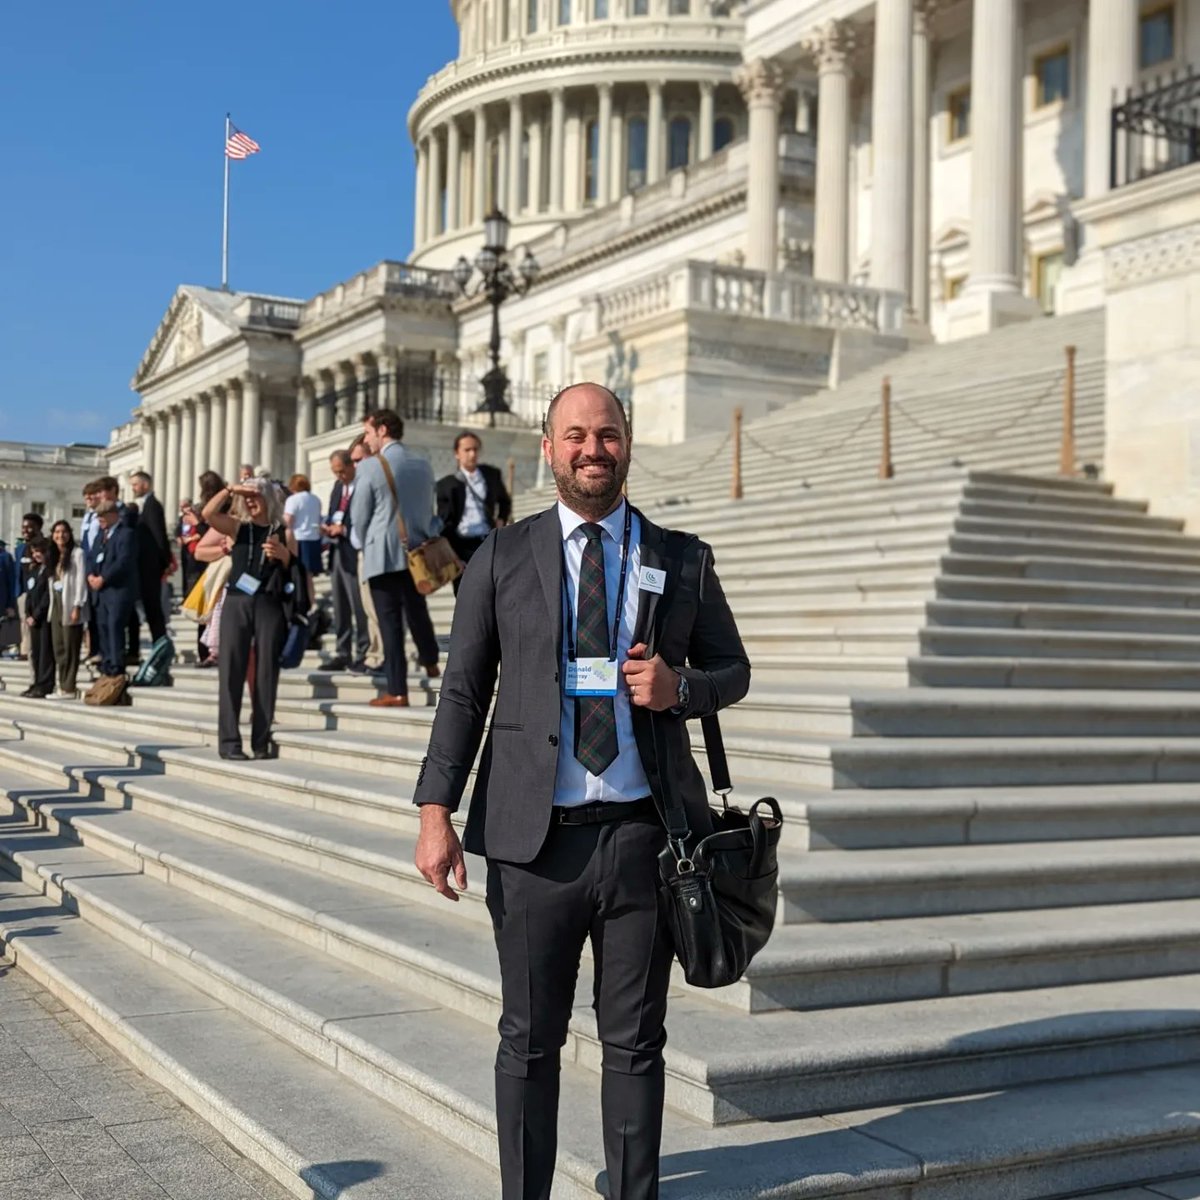 Like a kid on the first day of school! Headed to lobby our Members of Congress on the need for #ClimateAction

#CCL2023 #GrassrootsClimate